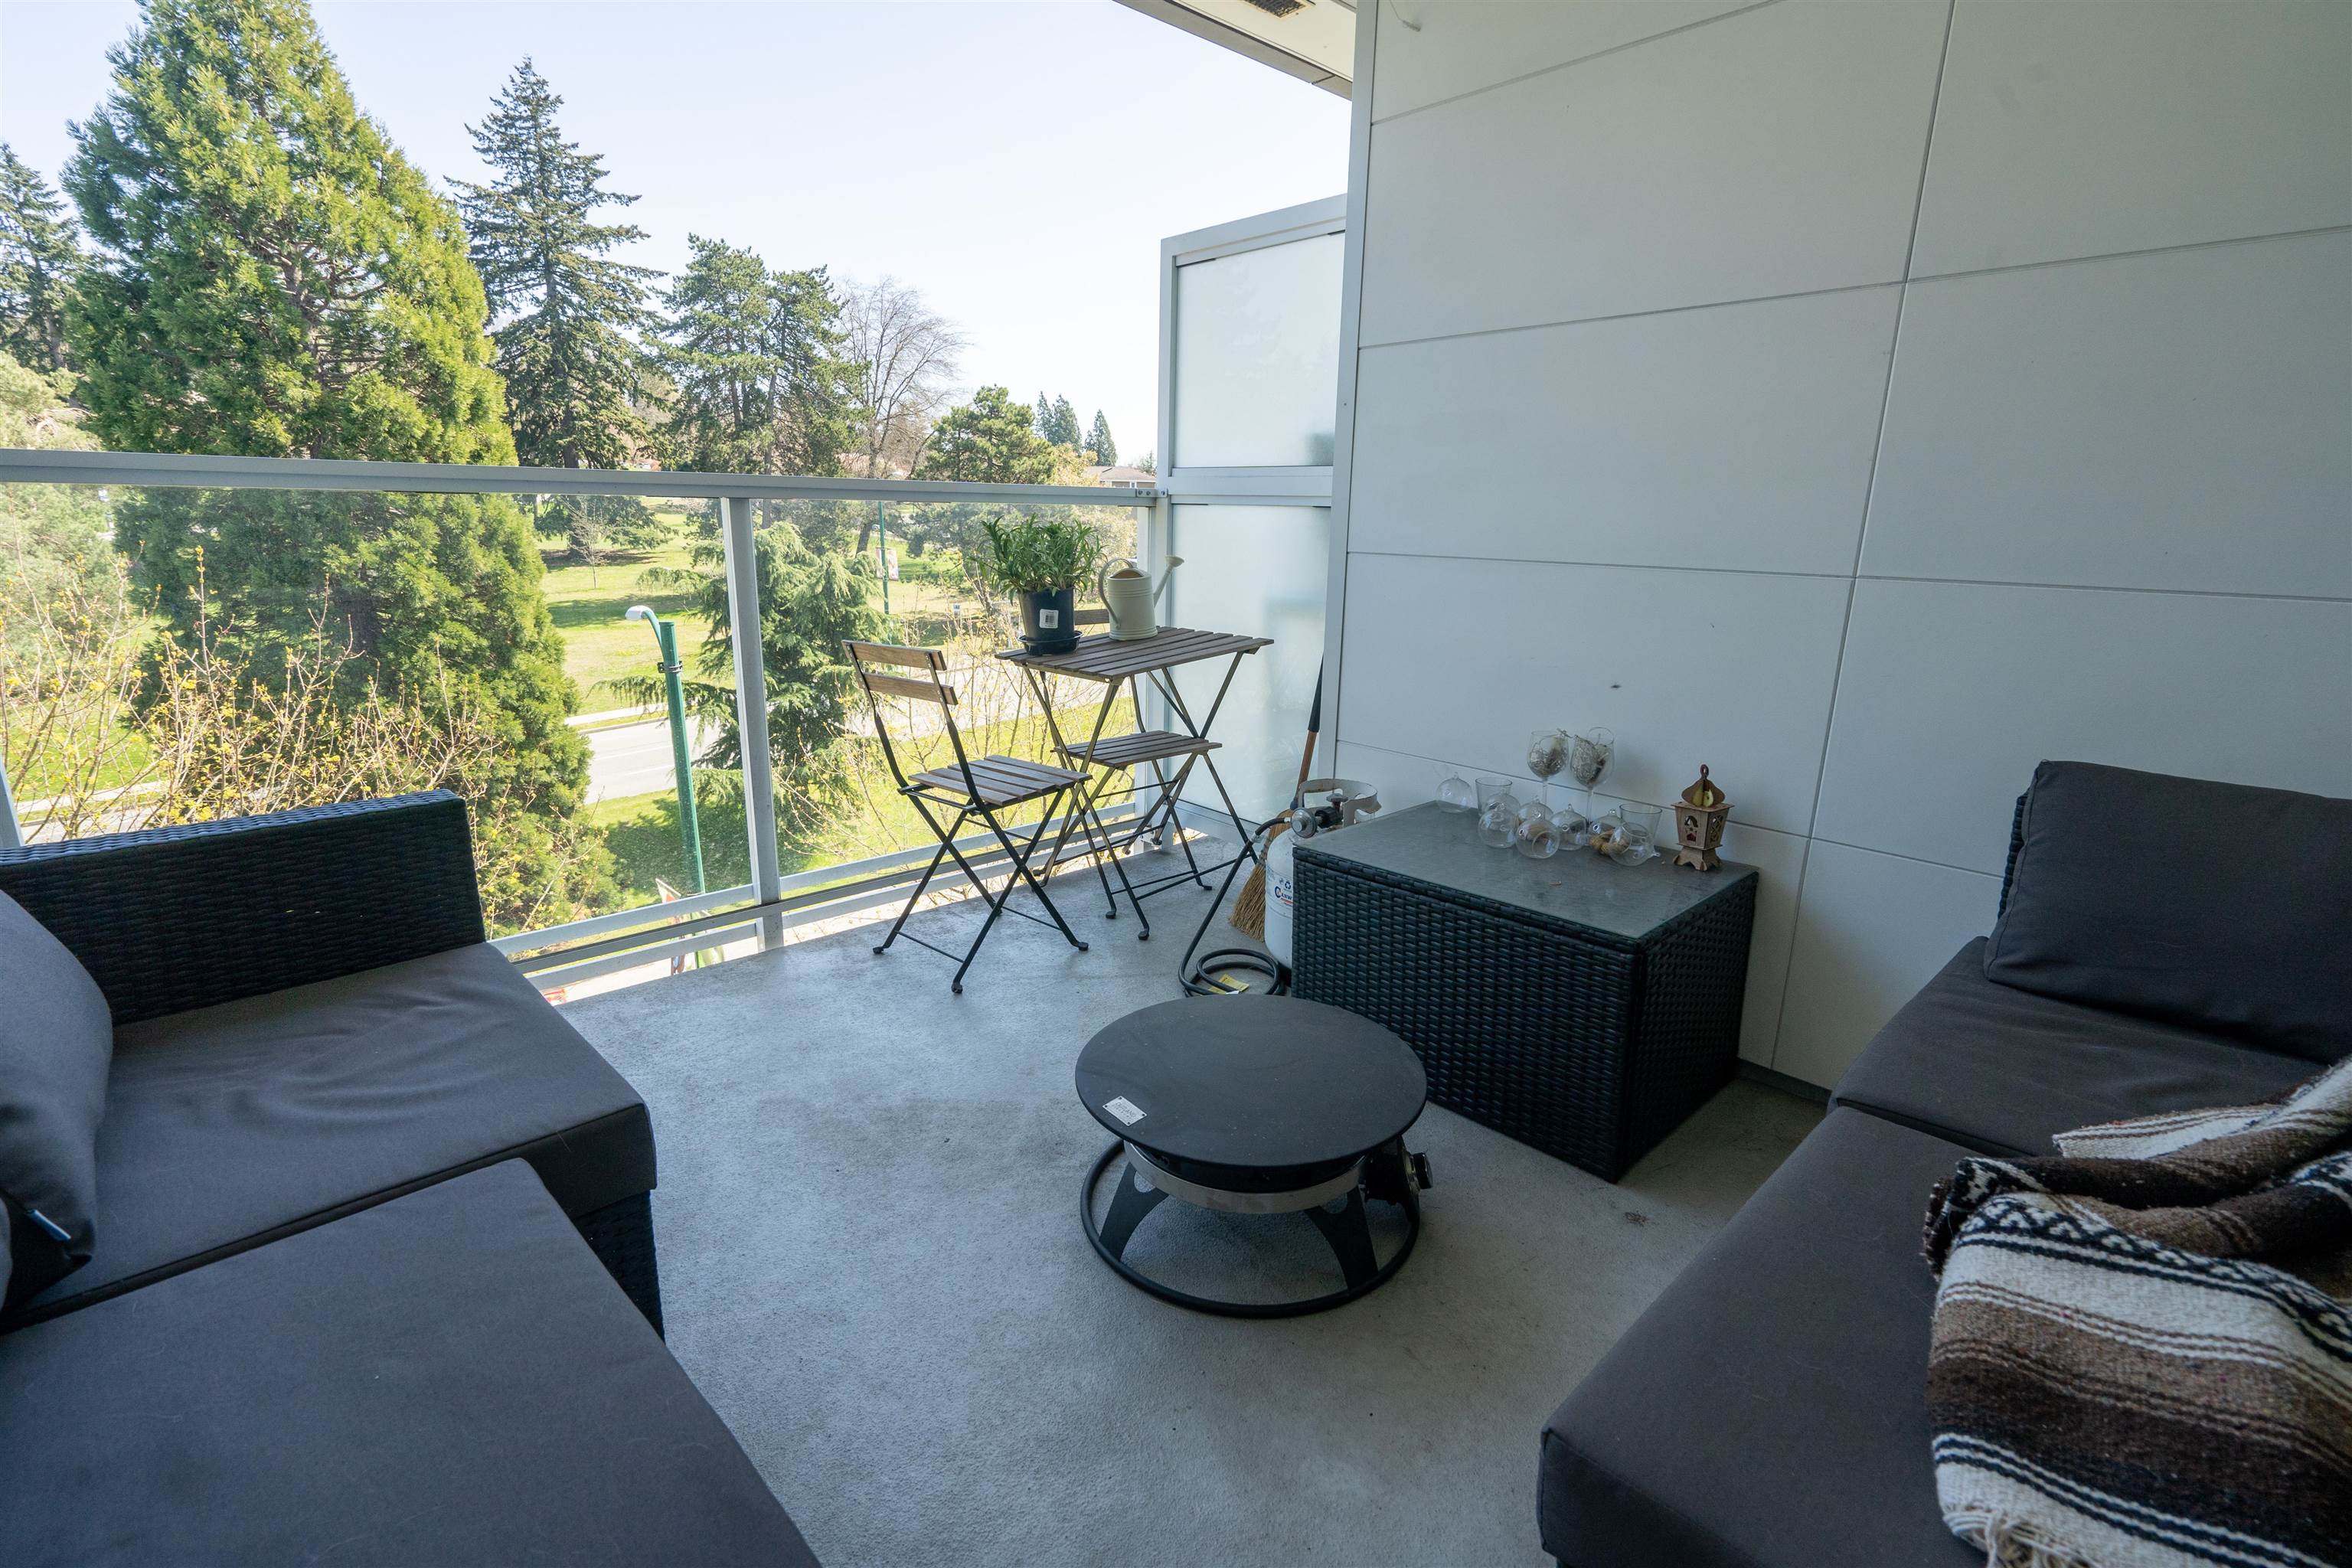 Listing image of 510 4867 CAMBIE STREET